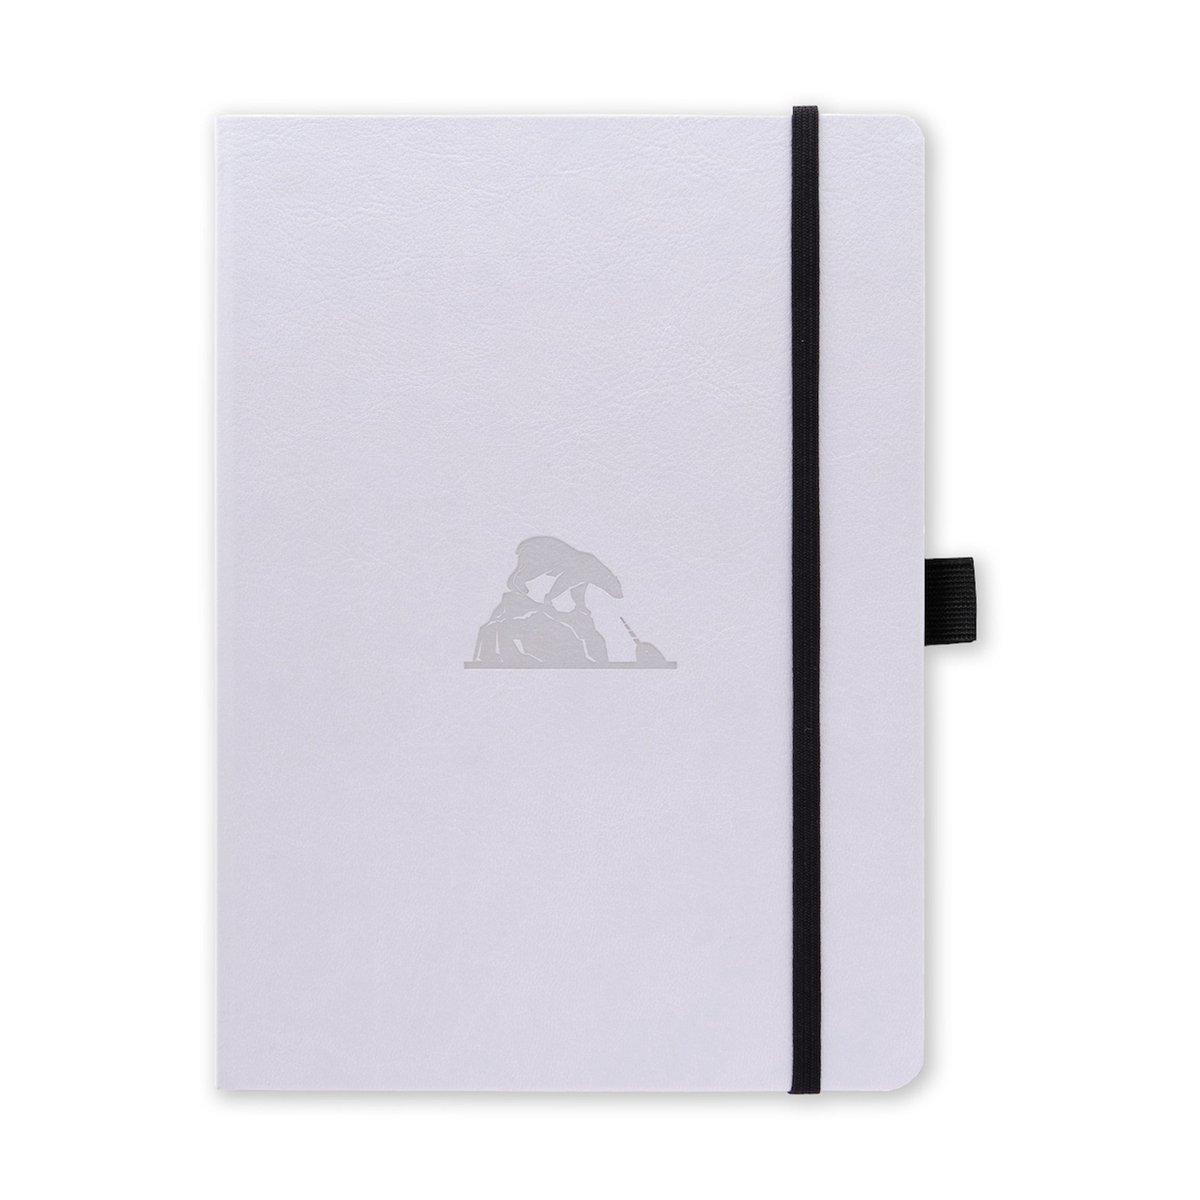 Dingbats Earth Glicine Arctic Journal – Dotted